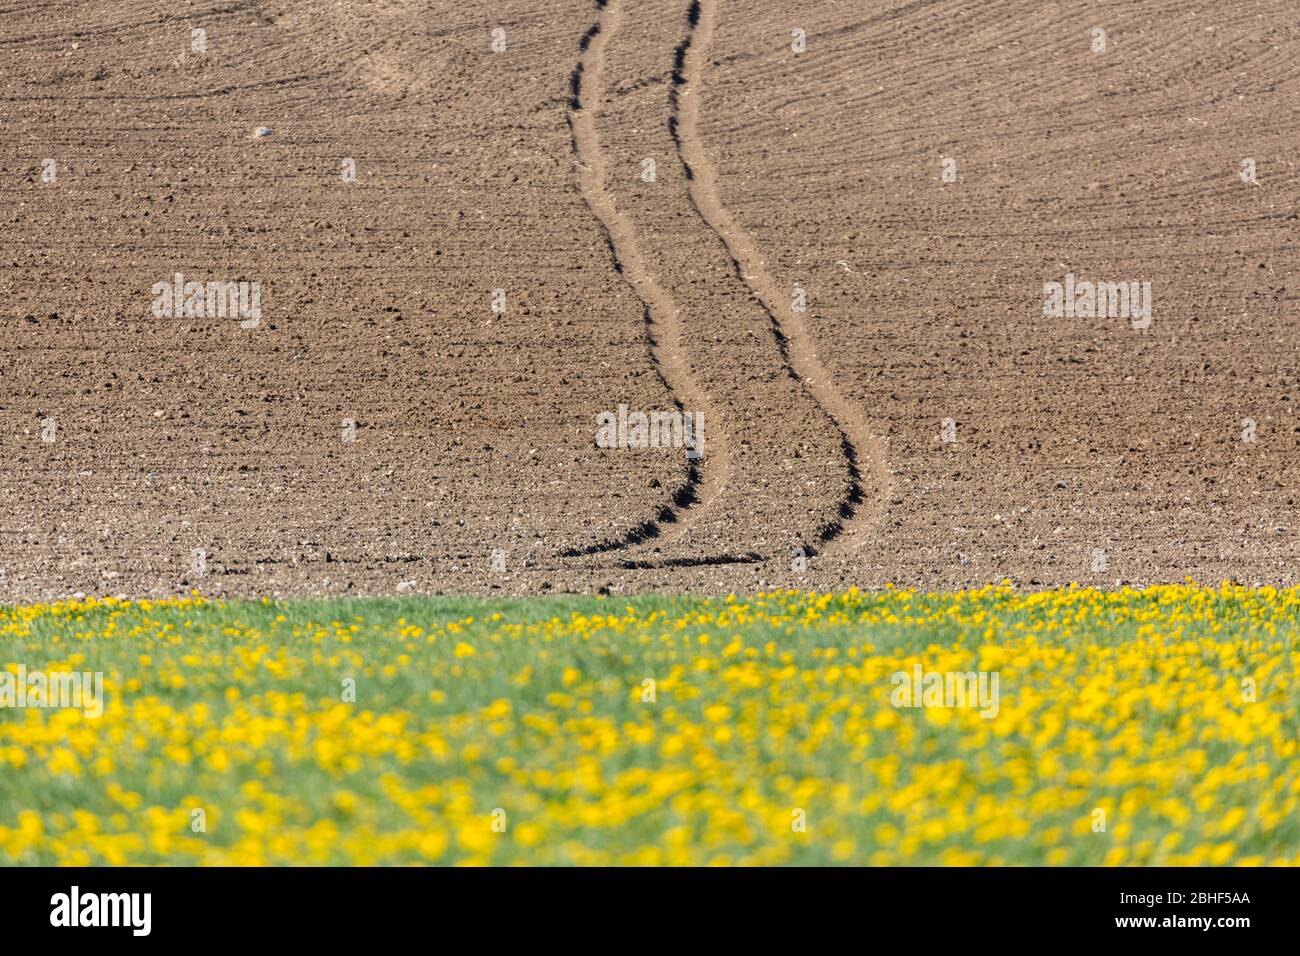 Tractor tracks leading thorugh an unplanted field. In the foreground a meadow with yellow flowers. Concept for agriculture, farming, cultivation. Stock Photo